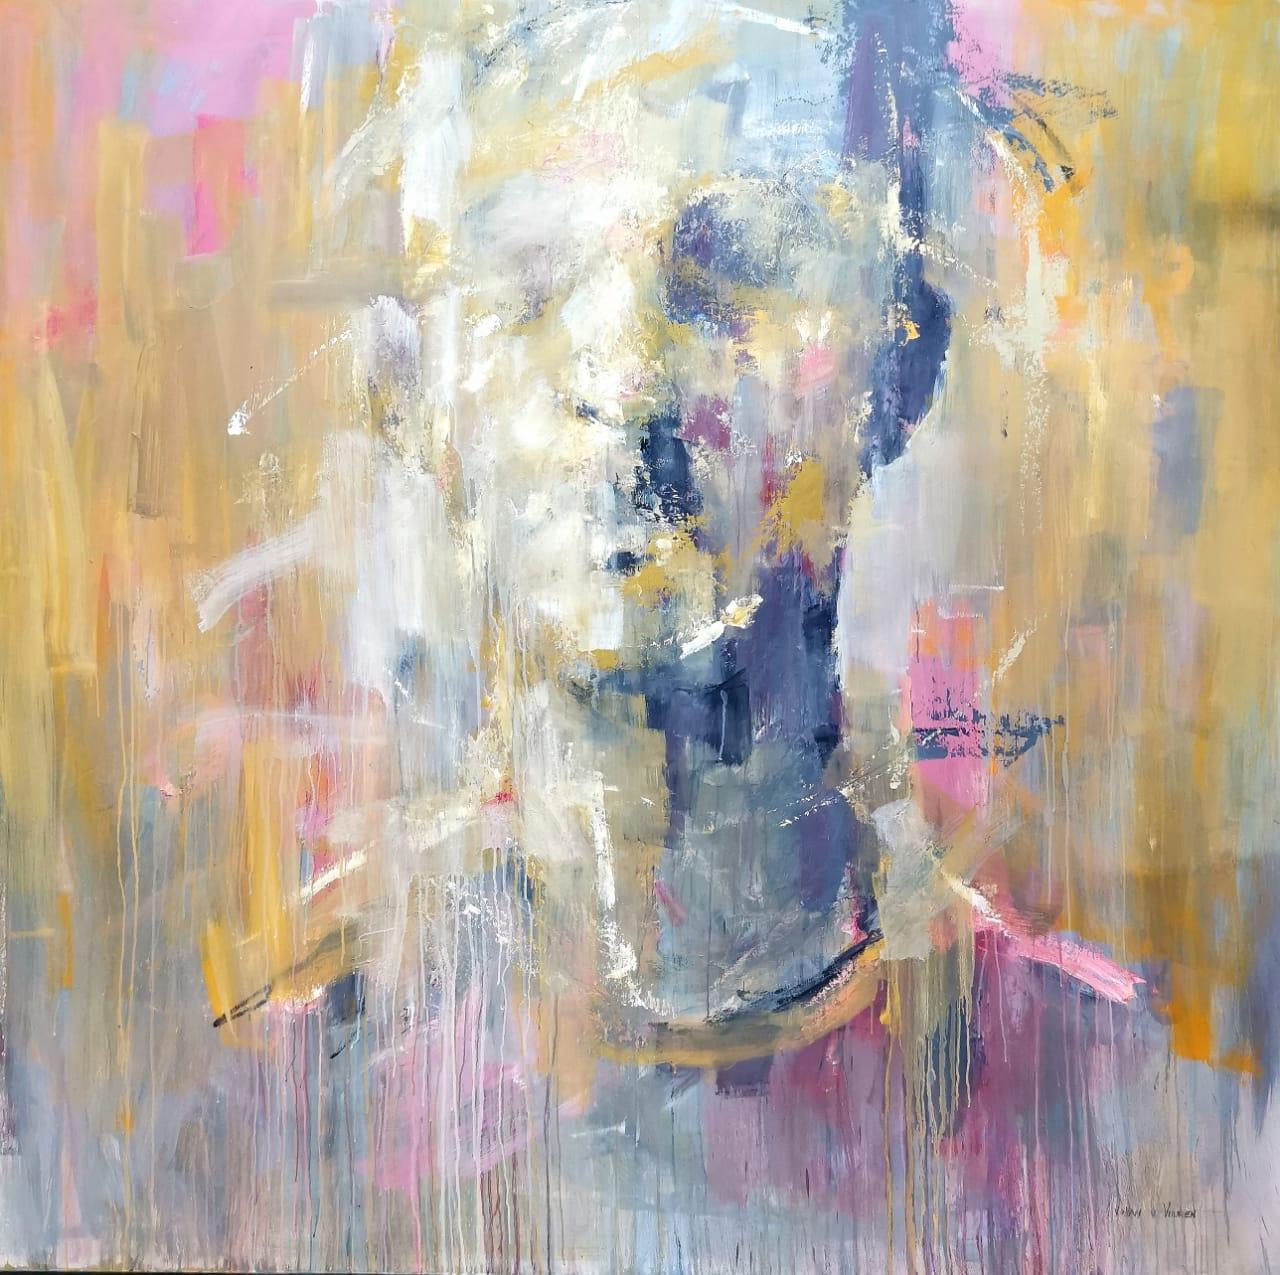 Oil on Board Abstracted Expressive Portrait "Untitled"